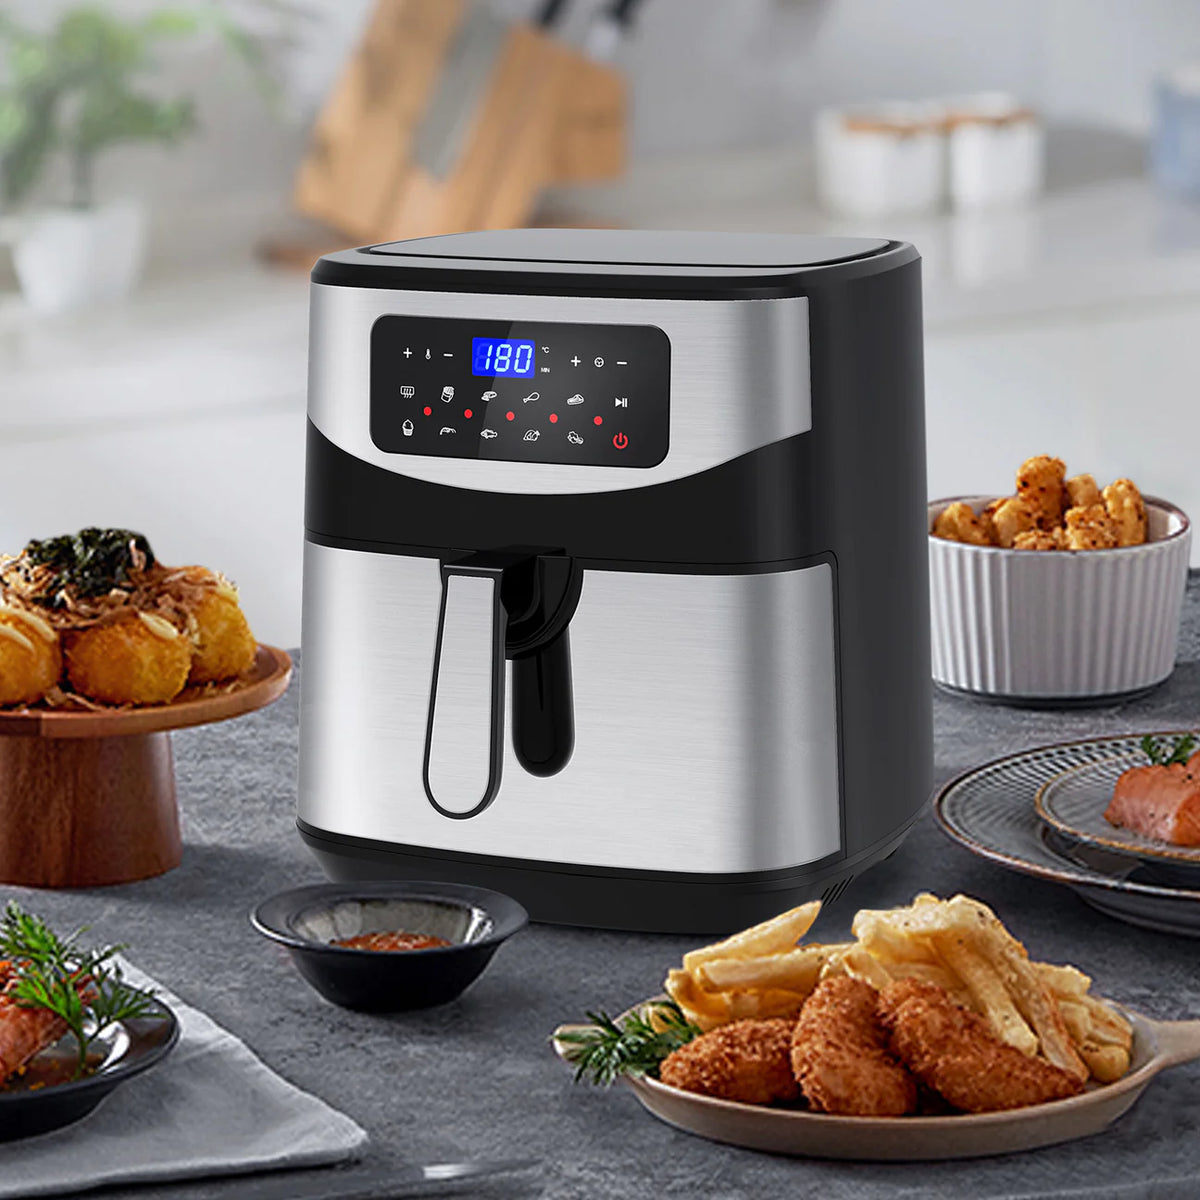 Health Air Fryer,6L Electric Hot Air Fryers Oven Oilless Cooker,-In-1 Air  Fryer LED Digital Touchscreen With Presets,Roast,Dehydrate Bake,For 1-2